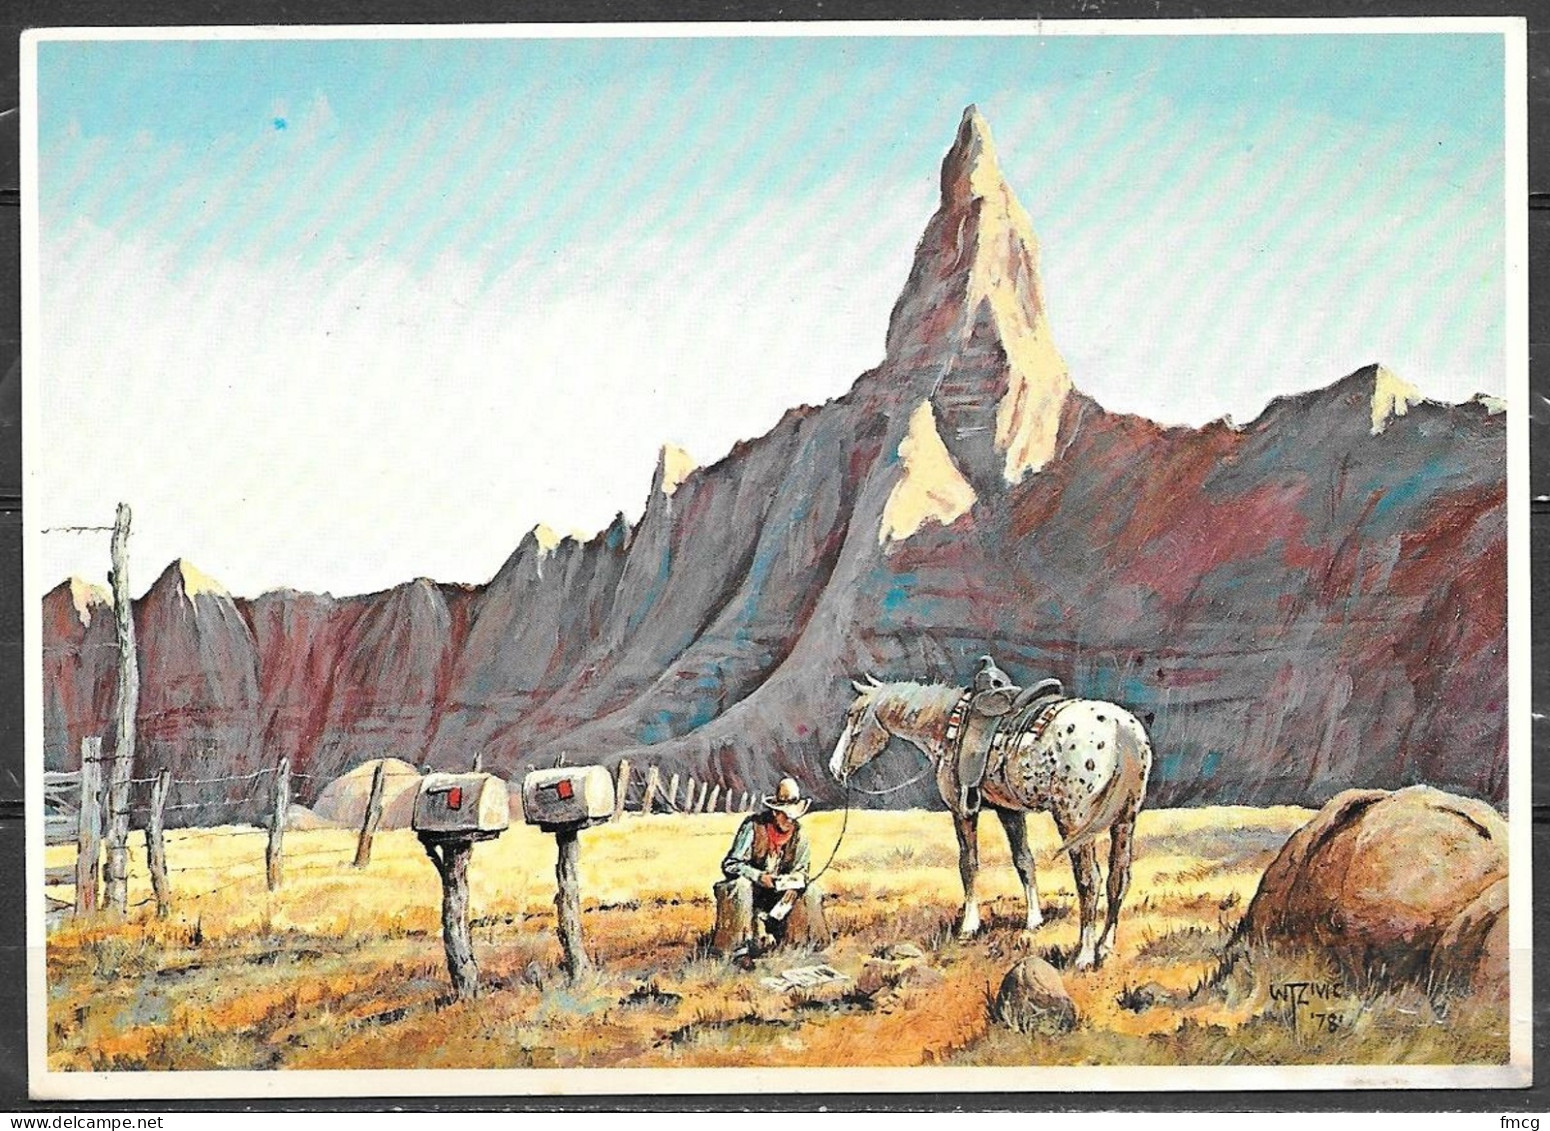 South Dakota, Wall, Wall Drug Painting, Unused - Other & Unclassified